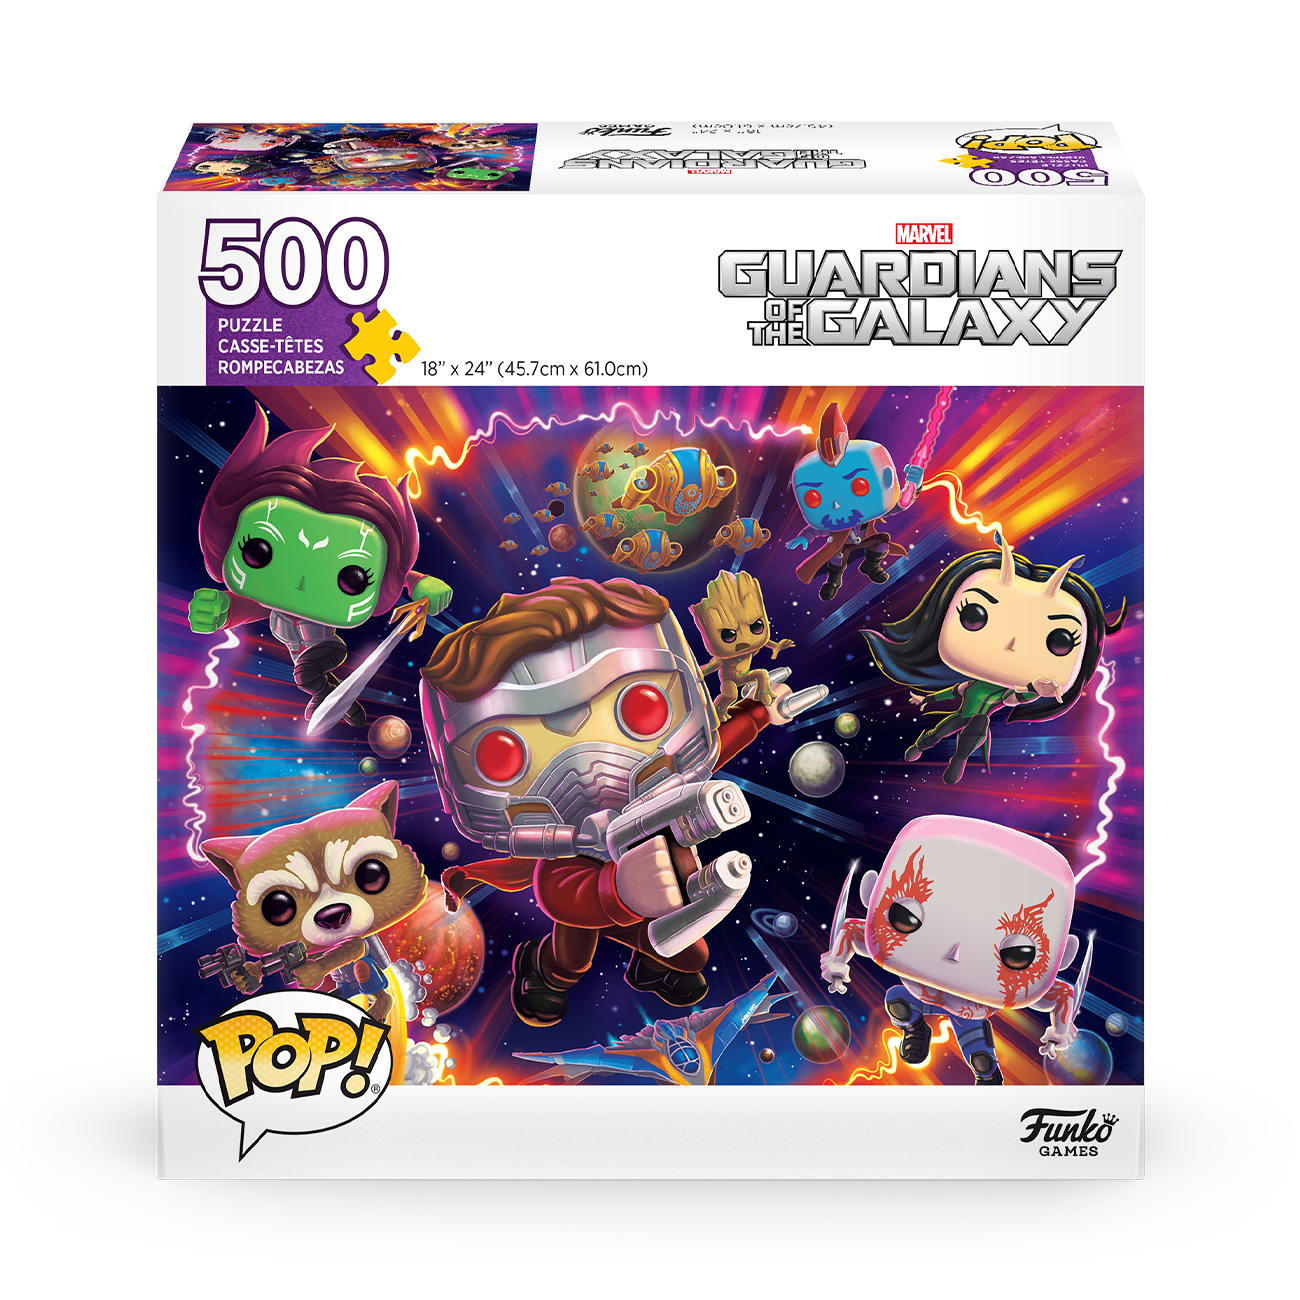 Buy Guardians the Galaxy Puzzle at Funko.